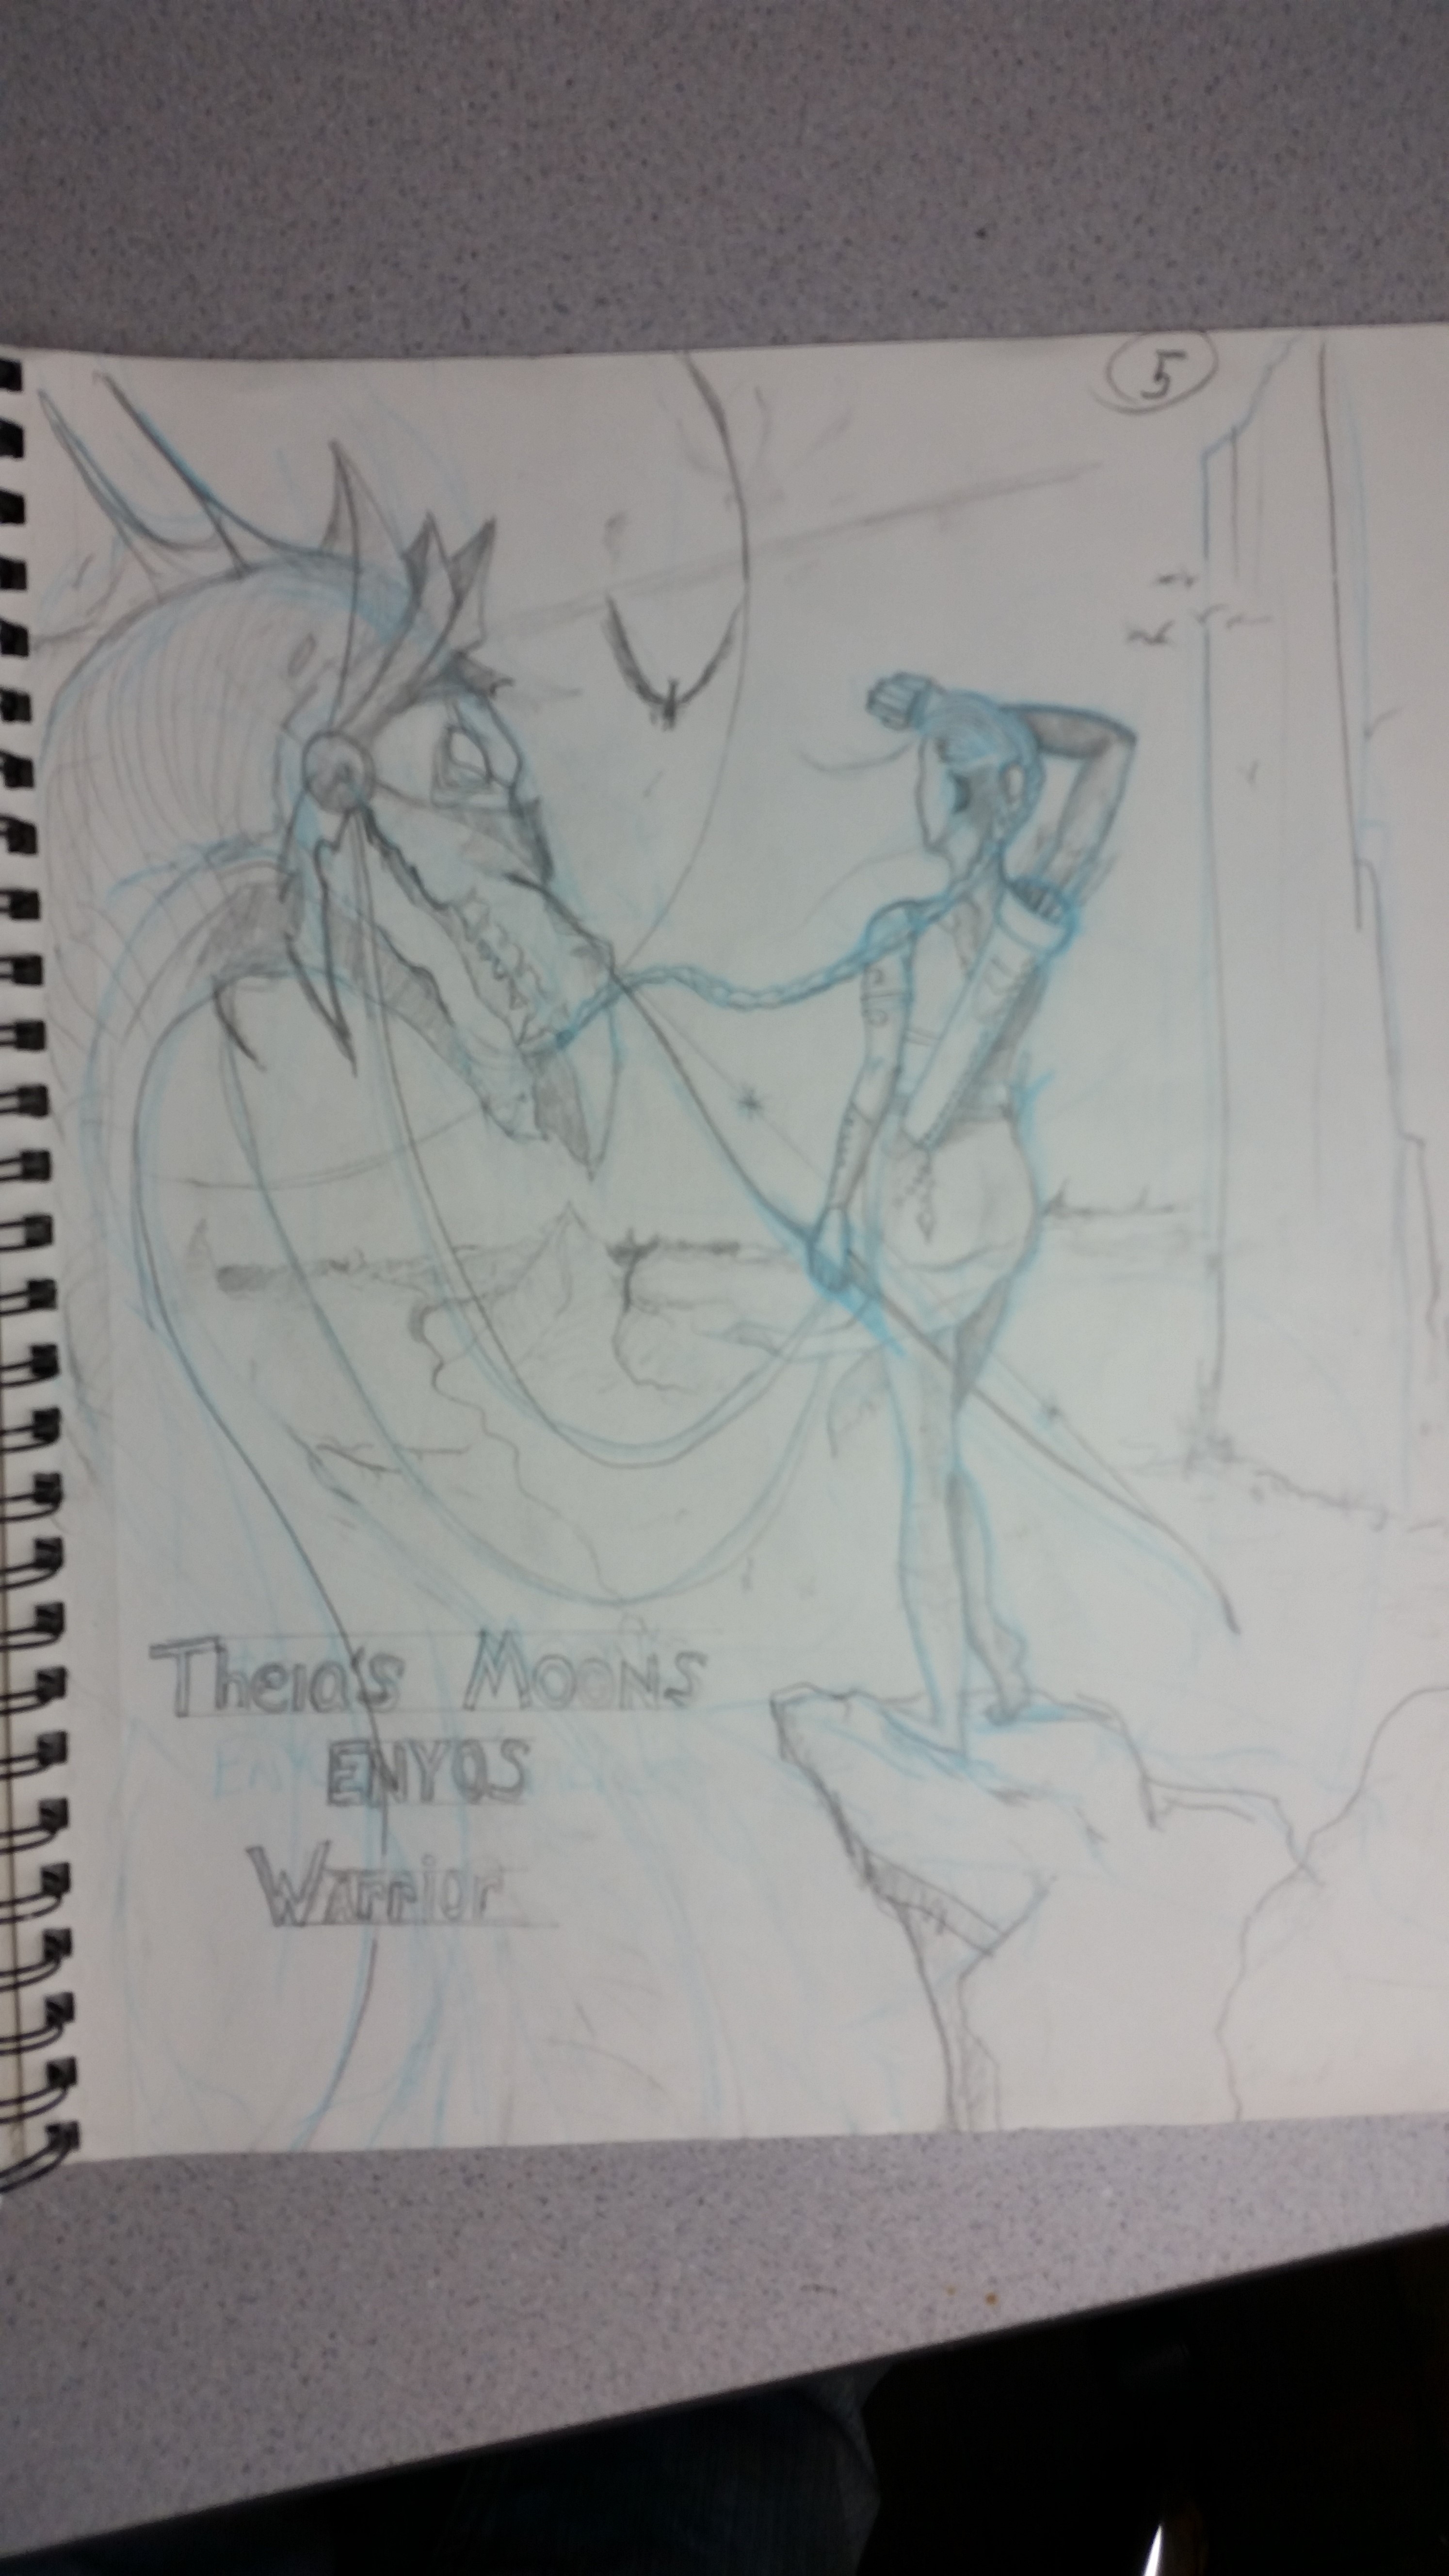 Sketch of book cover ideas and concepts for Theias Moons series